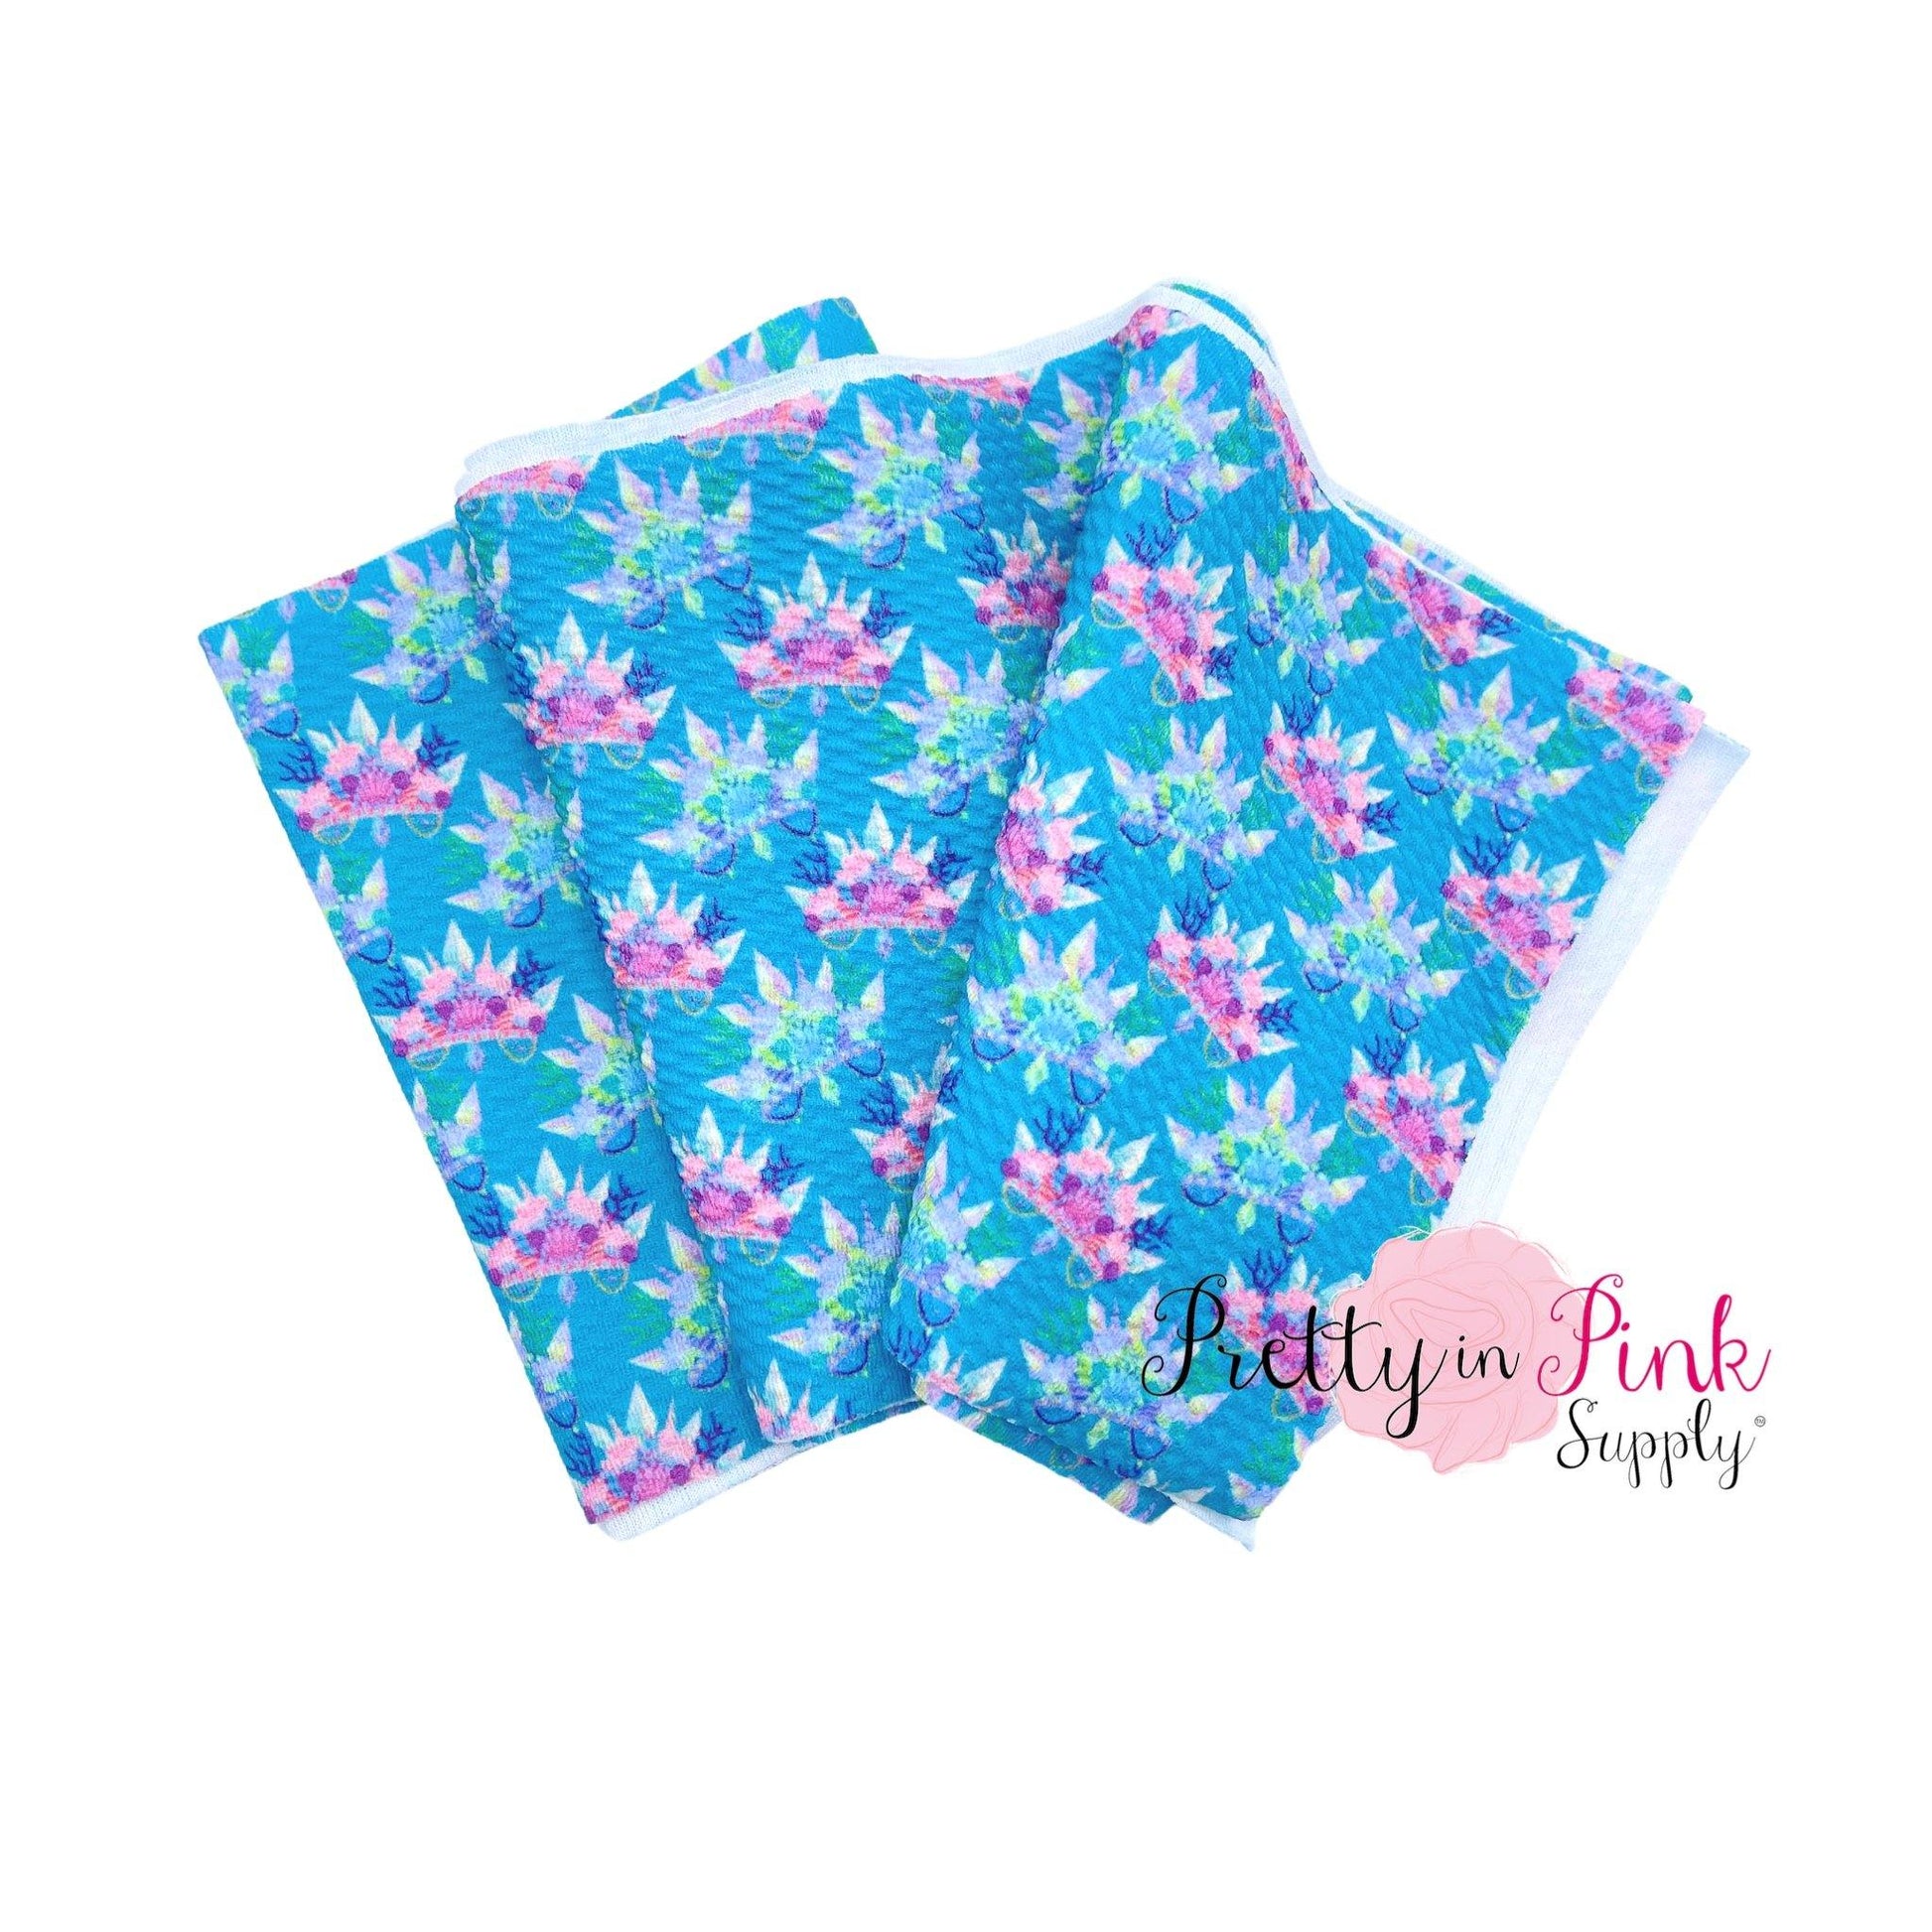 Majestic Mermaid Crowns | Liverpool Fabric - Pretty in Pink Supply